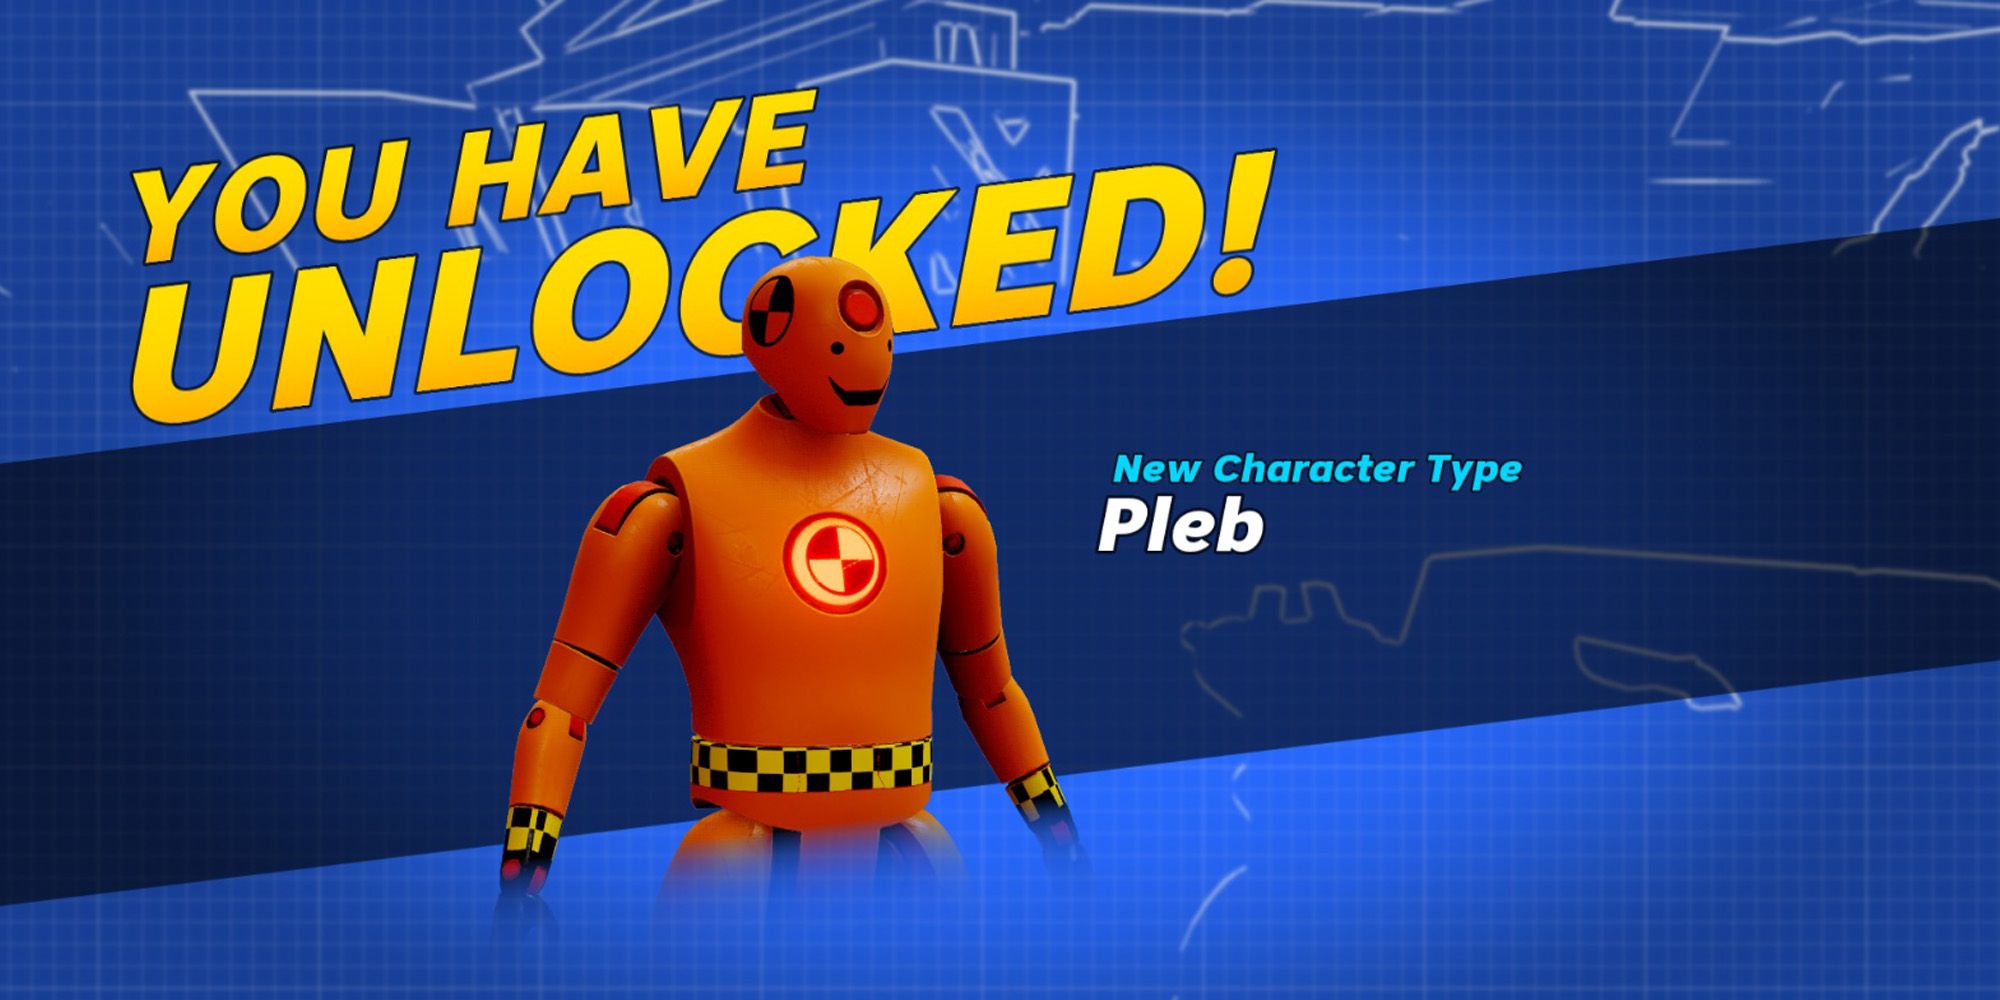 Hypercharge Unboxed Pleb character model customization skin tutorial